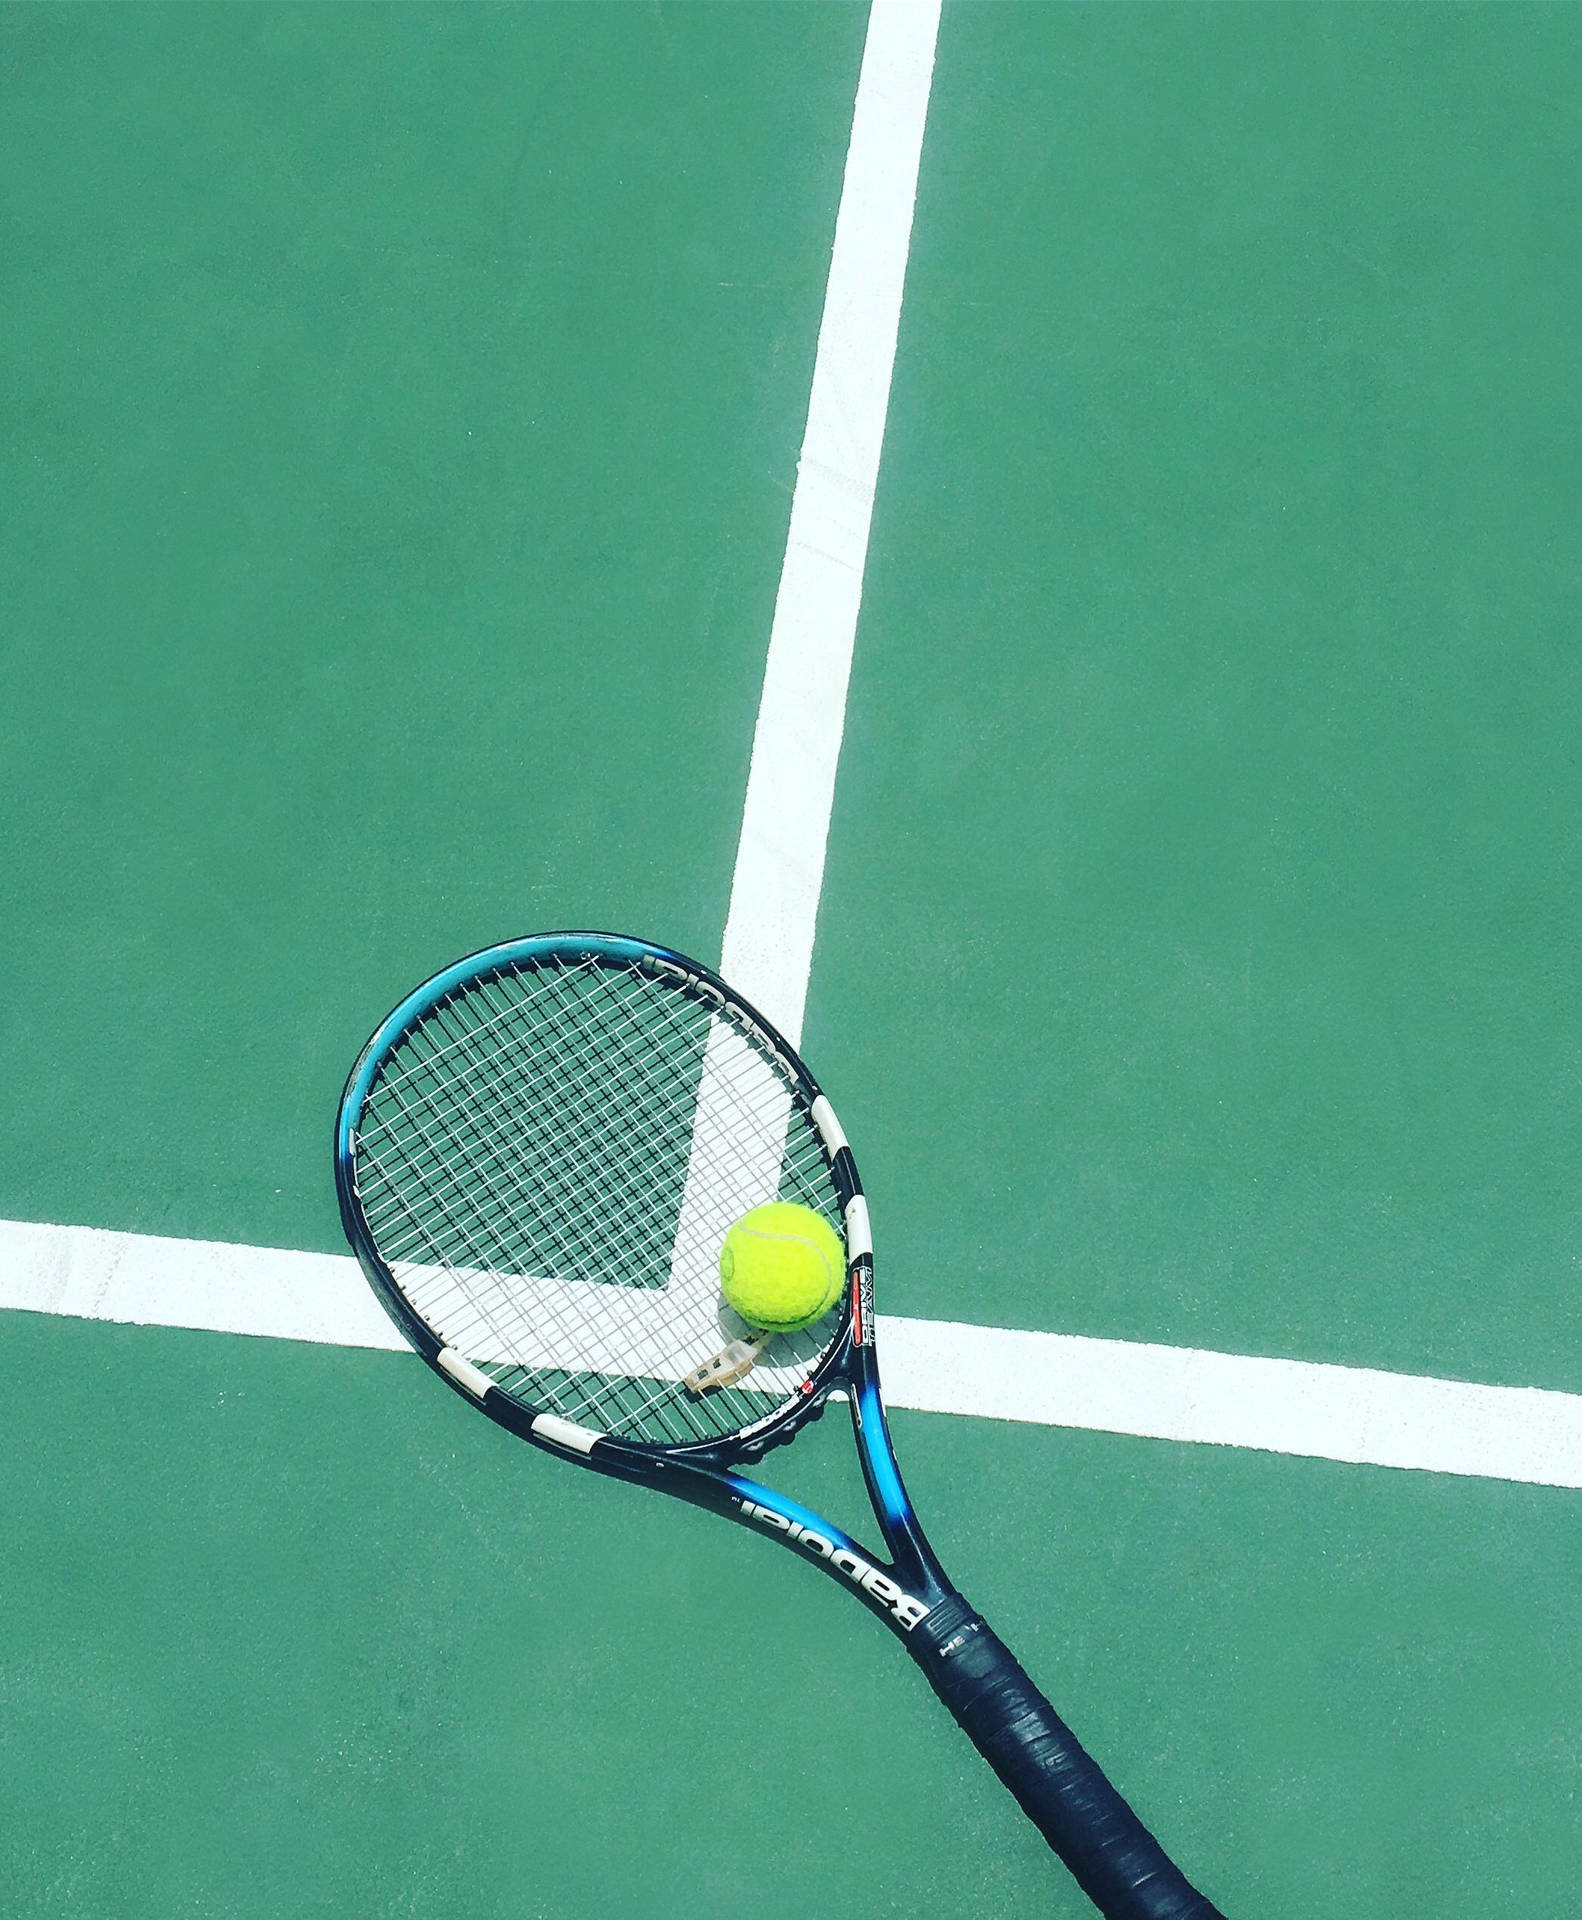 Tennis 2094X2541 Wallpaper and Background Image